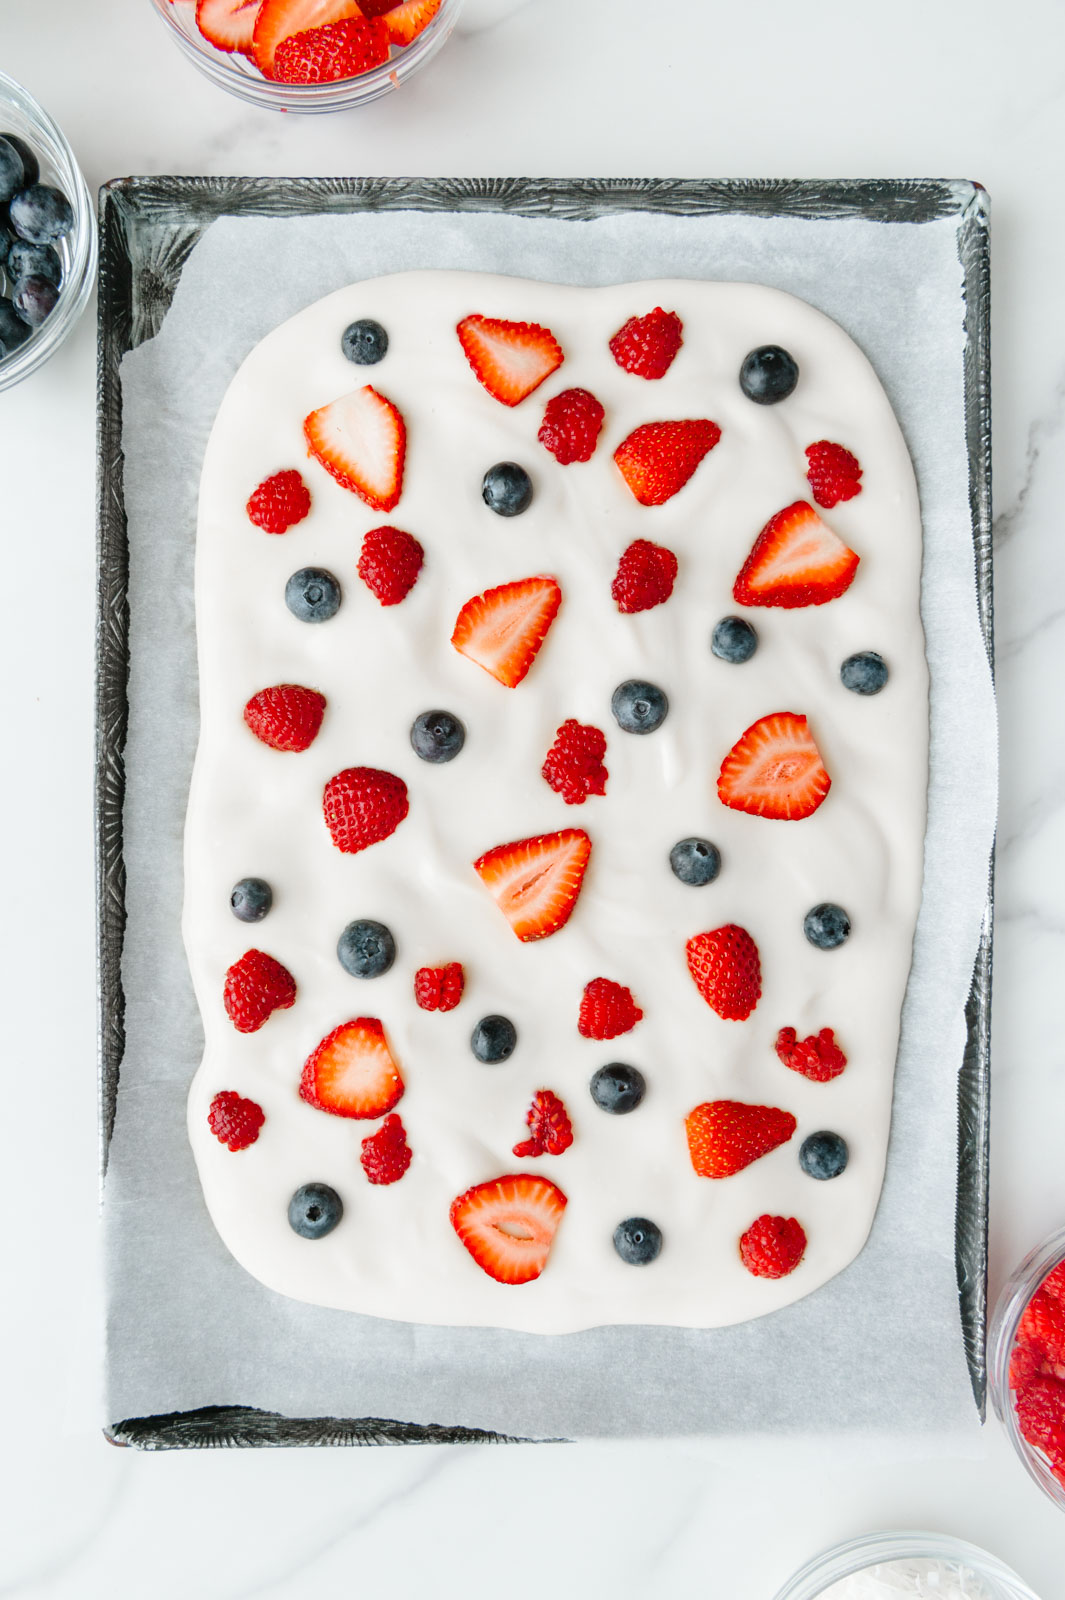 Raspberries added to dairy-free yogurt spread out on a baking sheet.